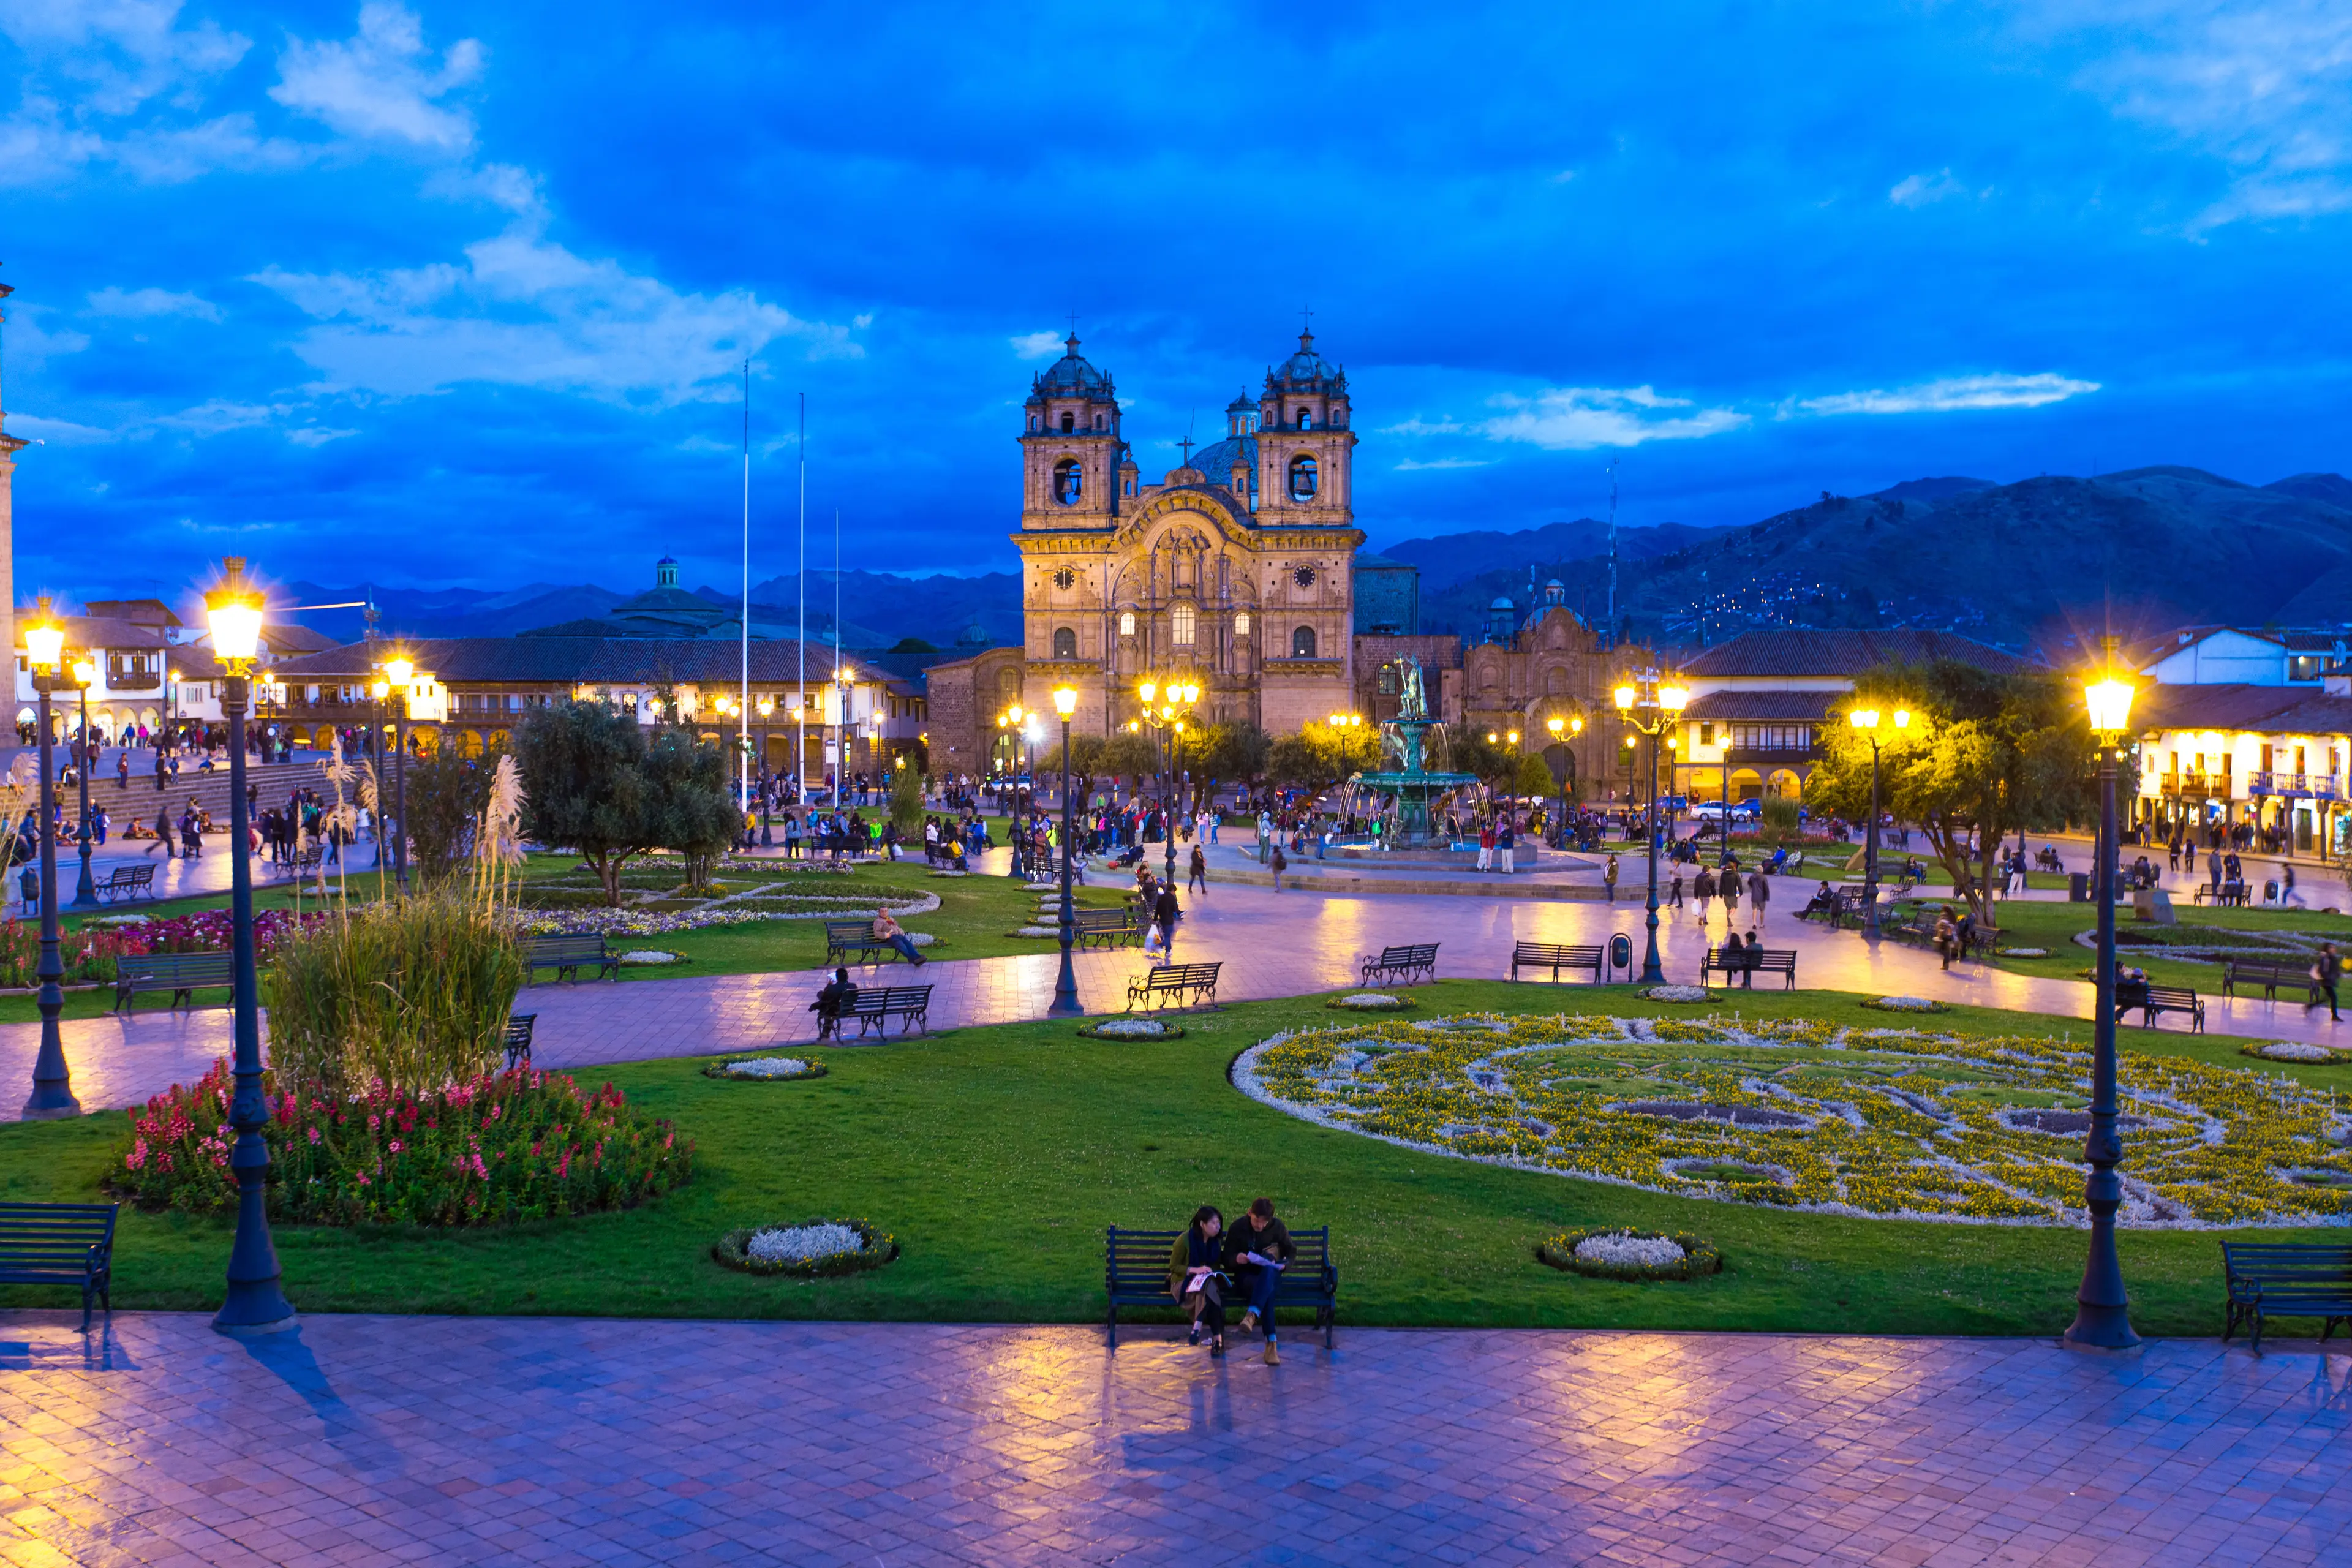 2-Day Local Experience: Sightseeing and Shopping in Cusco, Peru